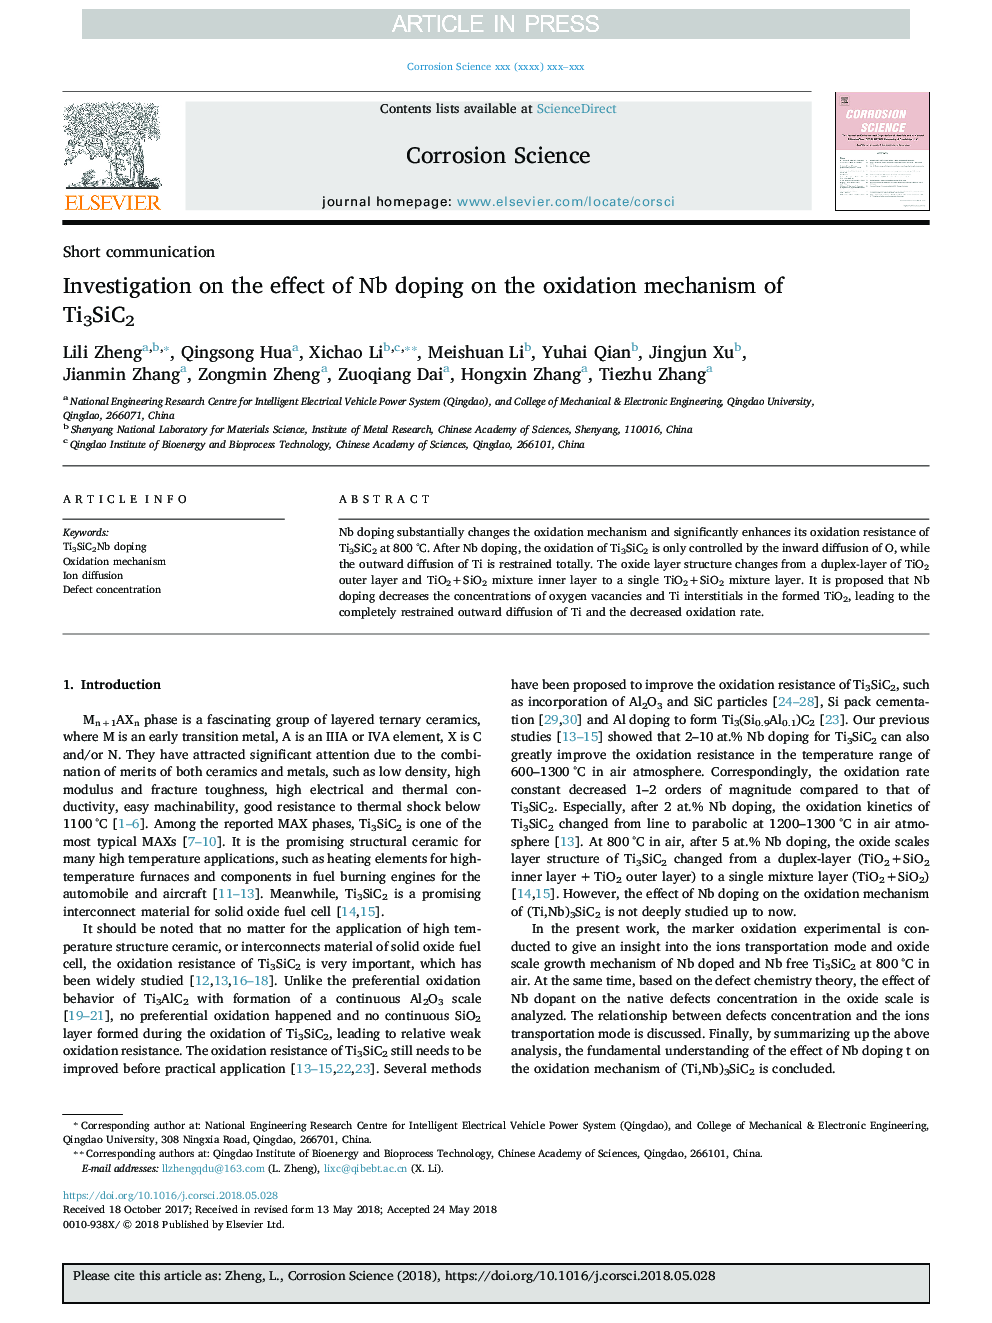 Investigation on the effect of Nb doping on the oxidation mechanism of Ti3SiC2